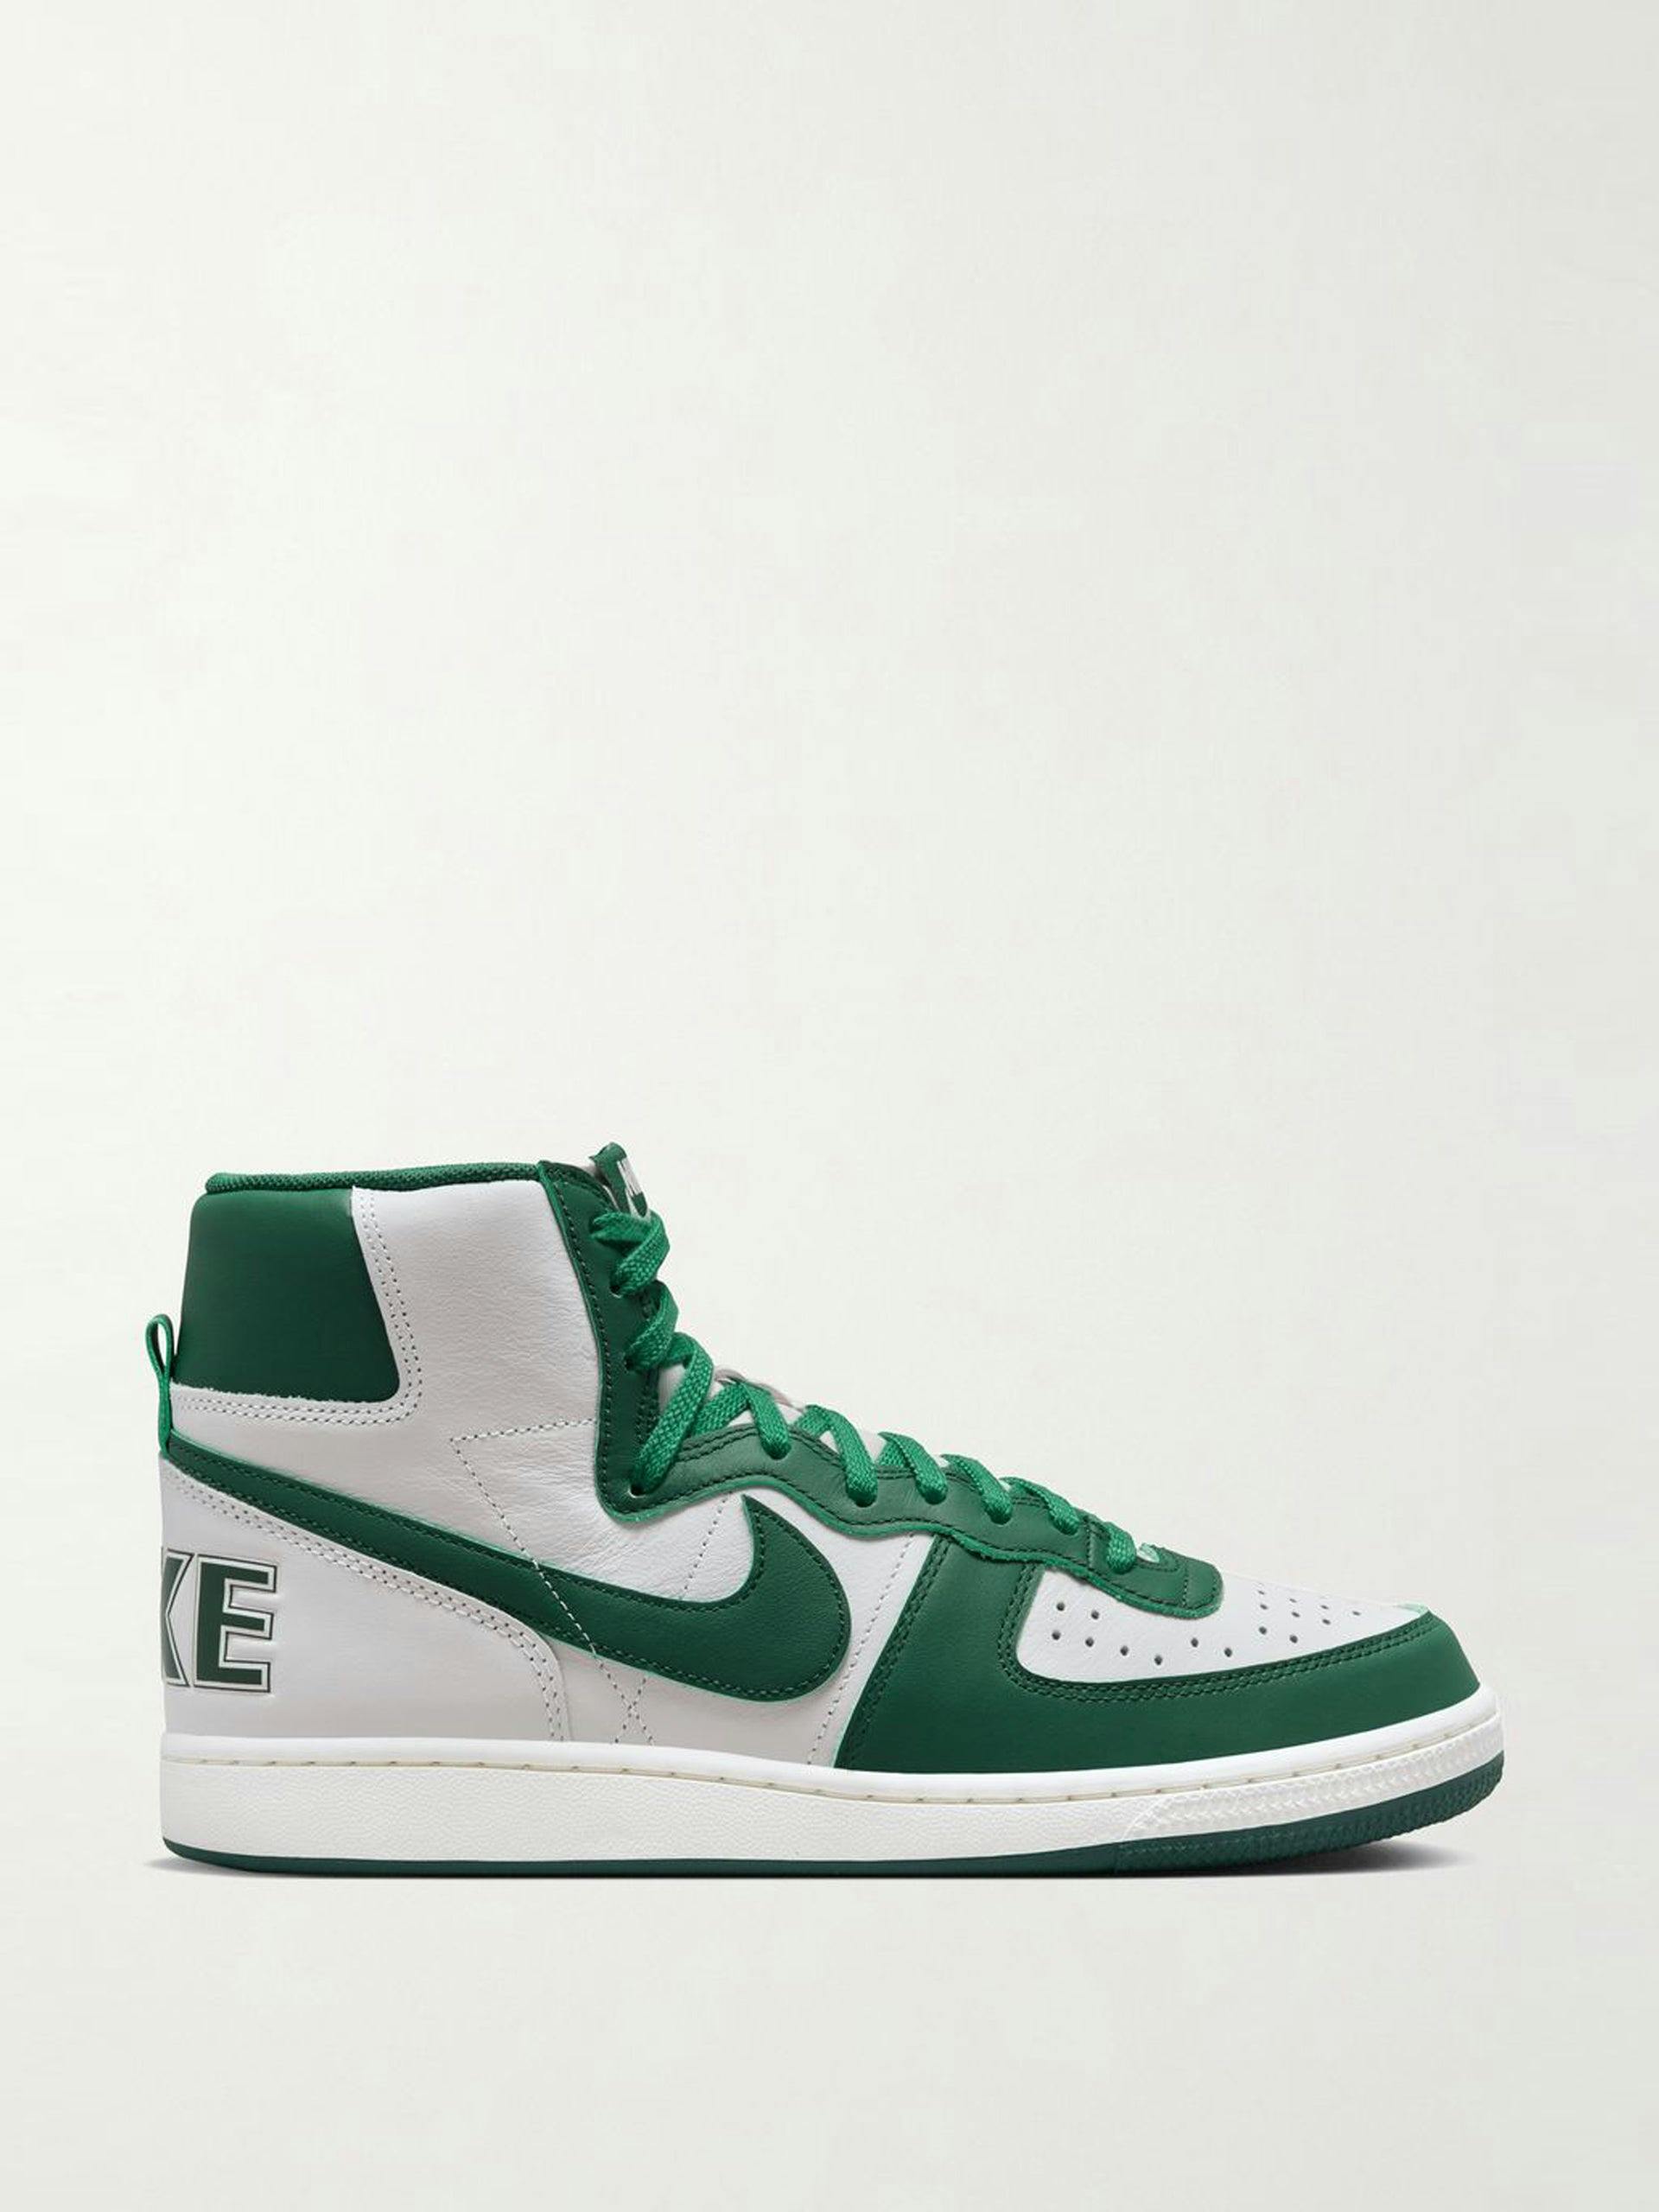 White and green high top trainers